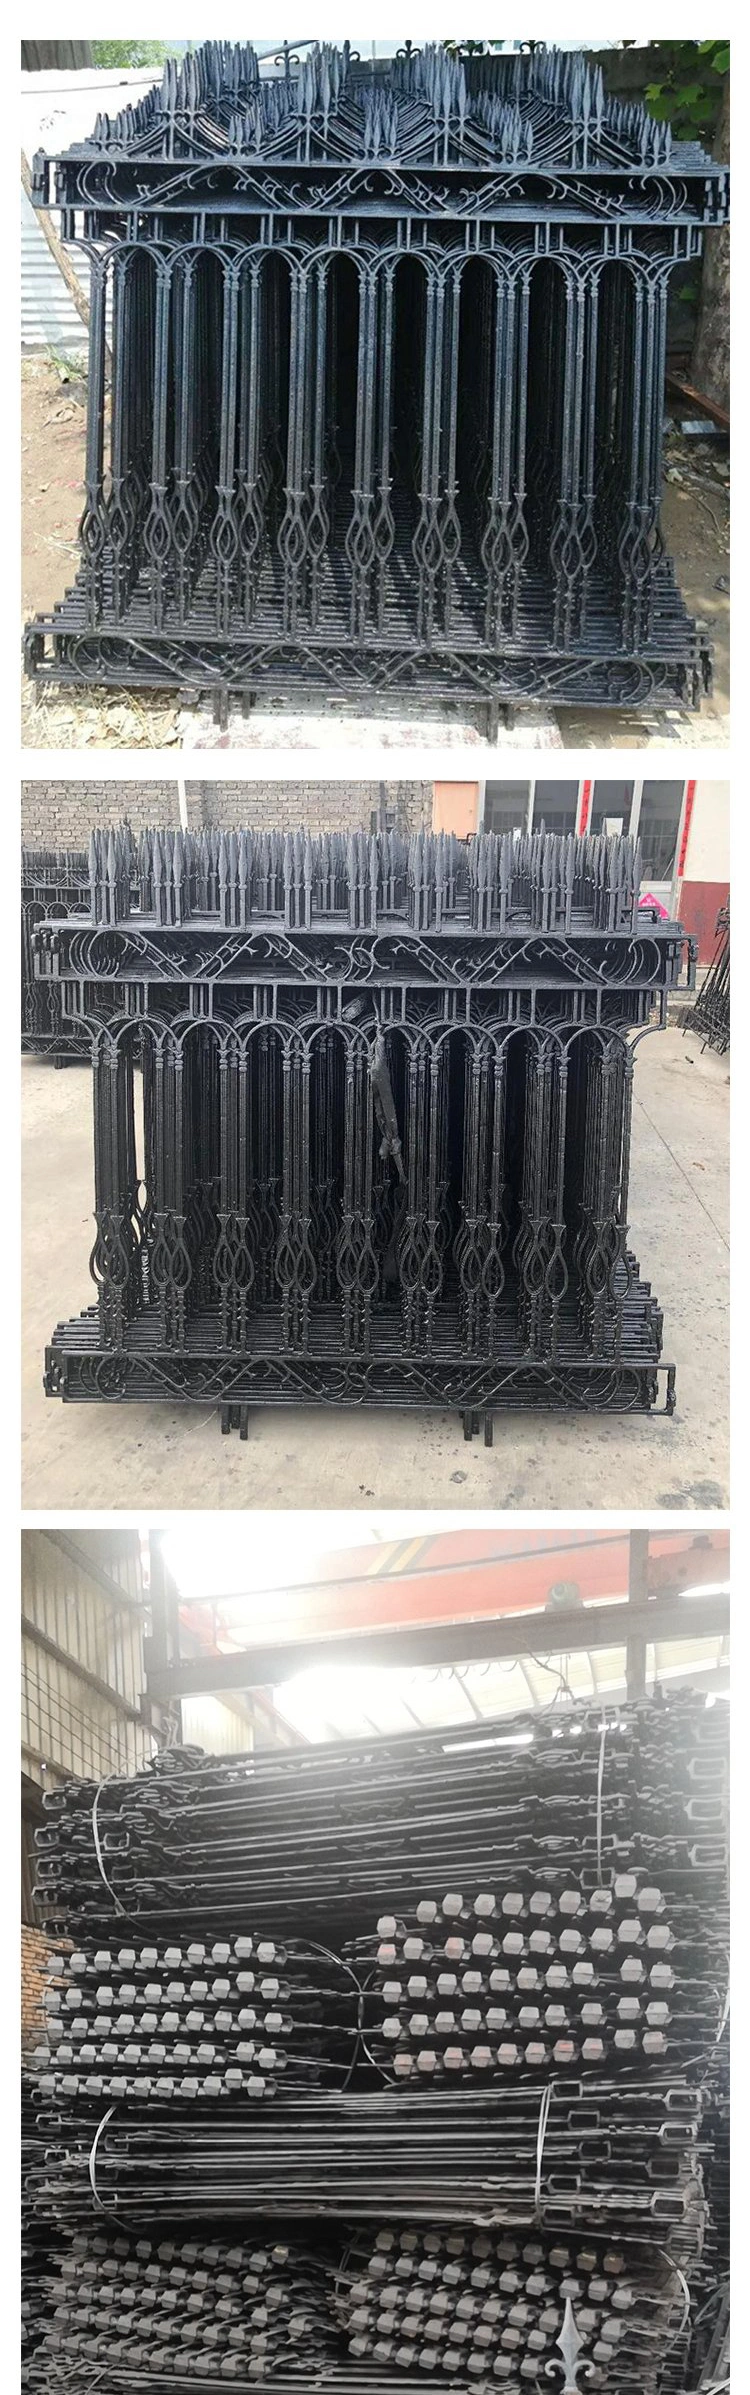 Different Hot Sales Artistic Design Security Steel Wrought Iron Main Driveway Door Fence Gates